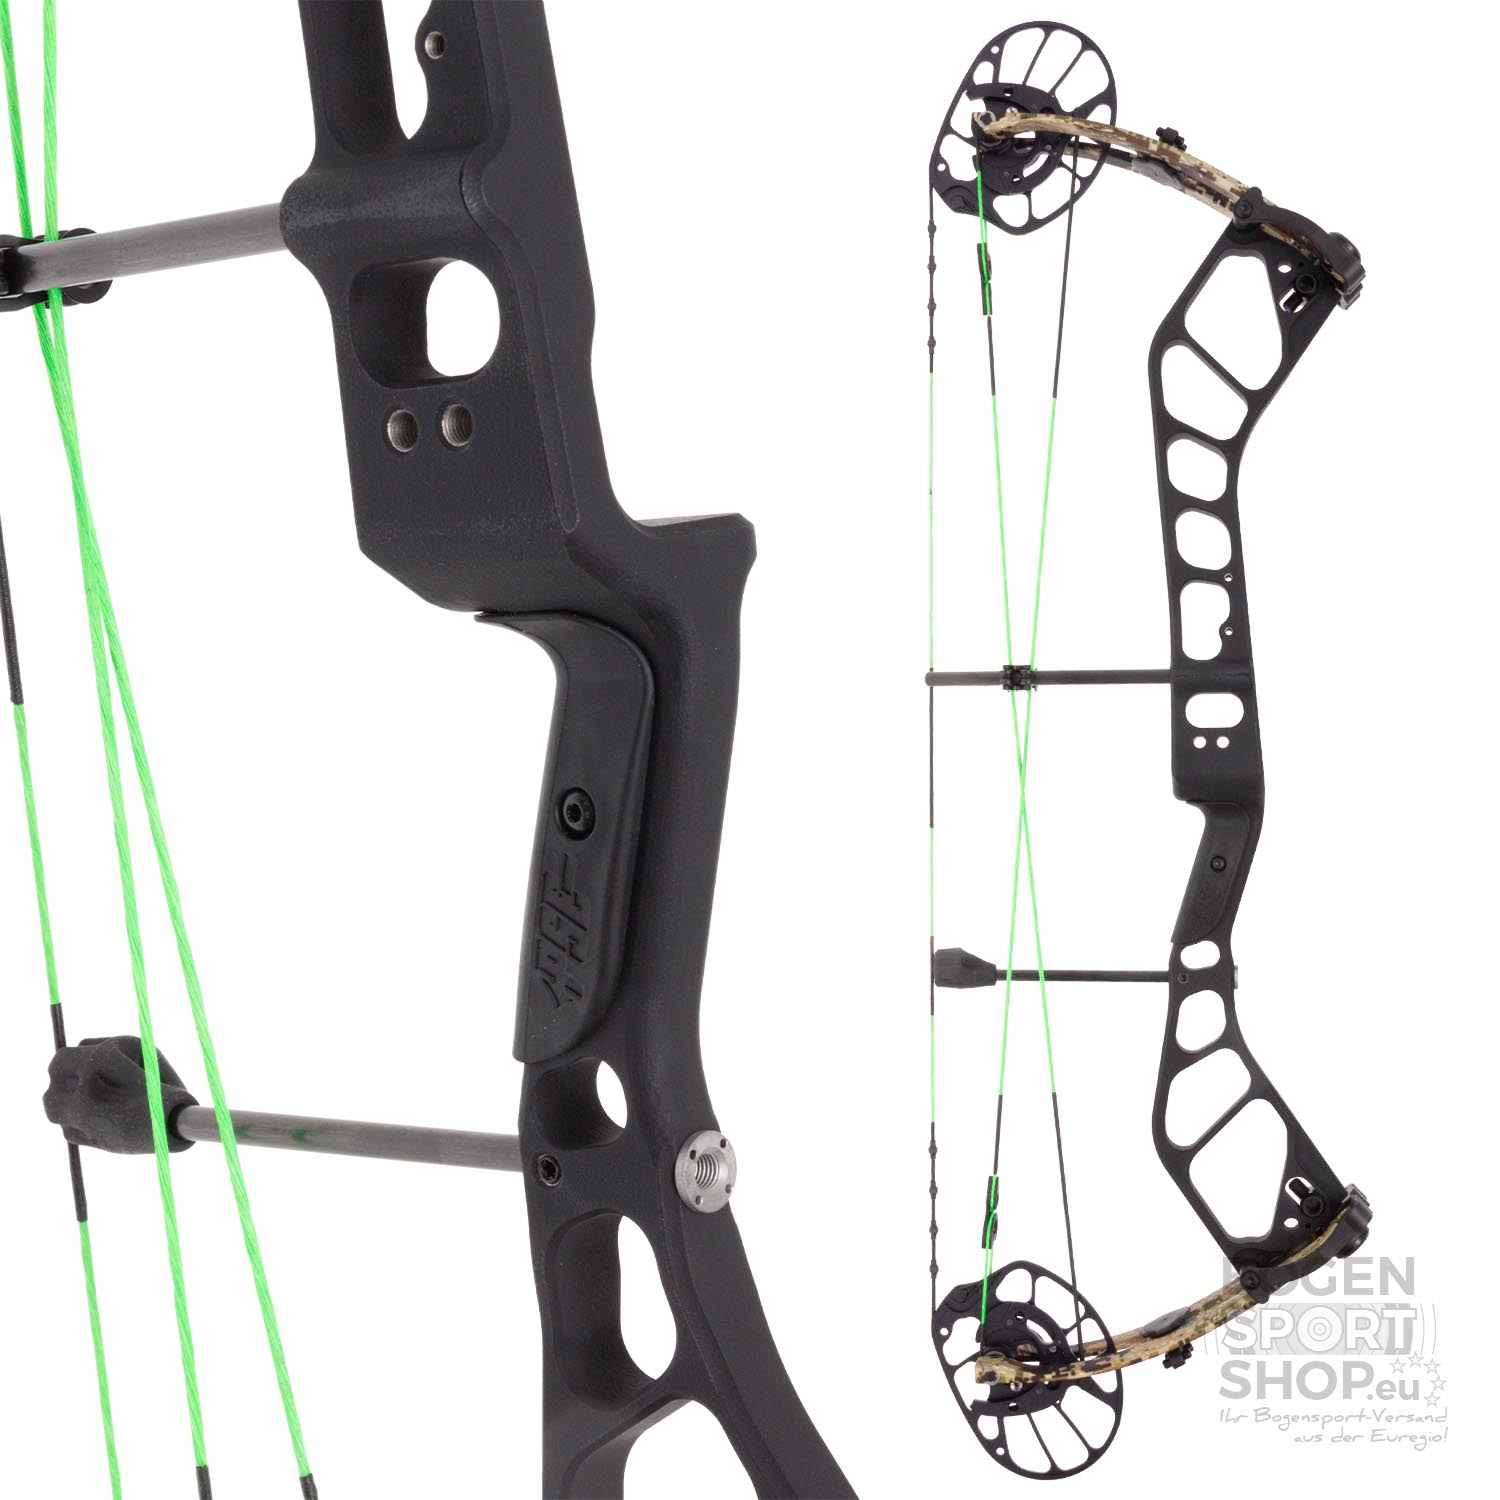  Buy PSE Compound Bow Nock On Embark 2021 online